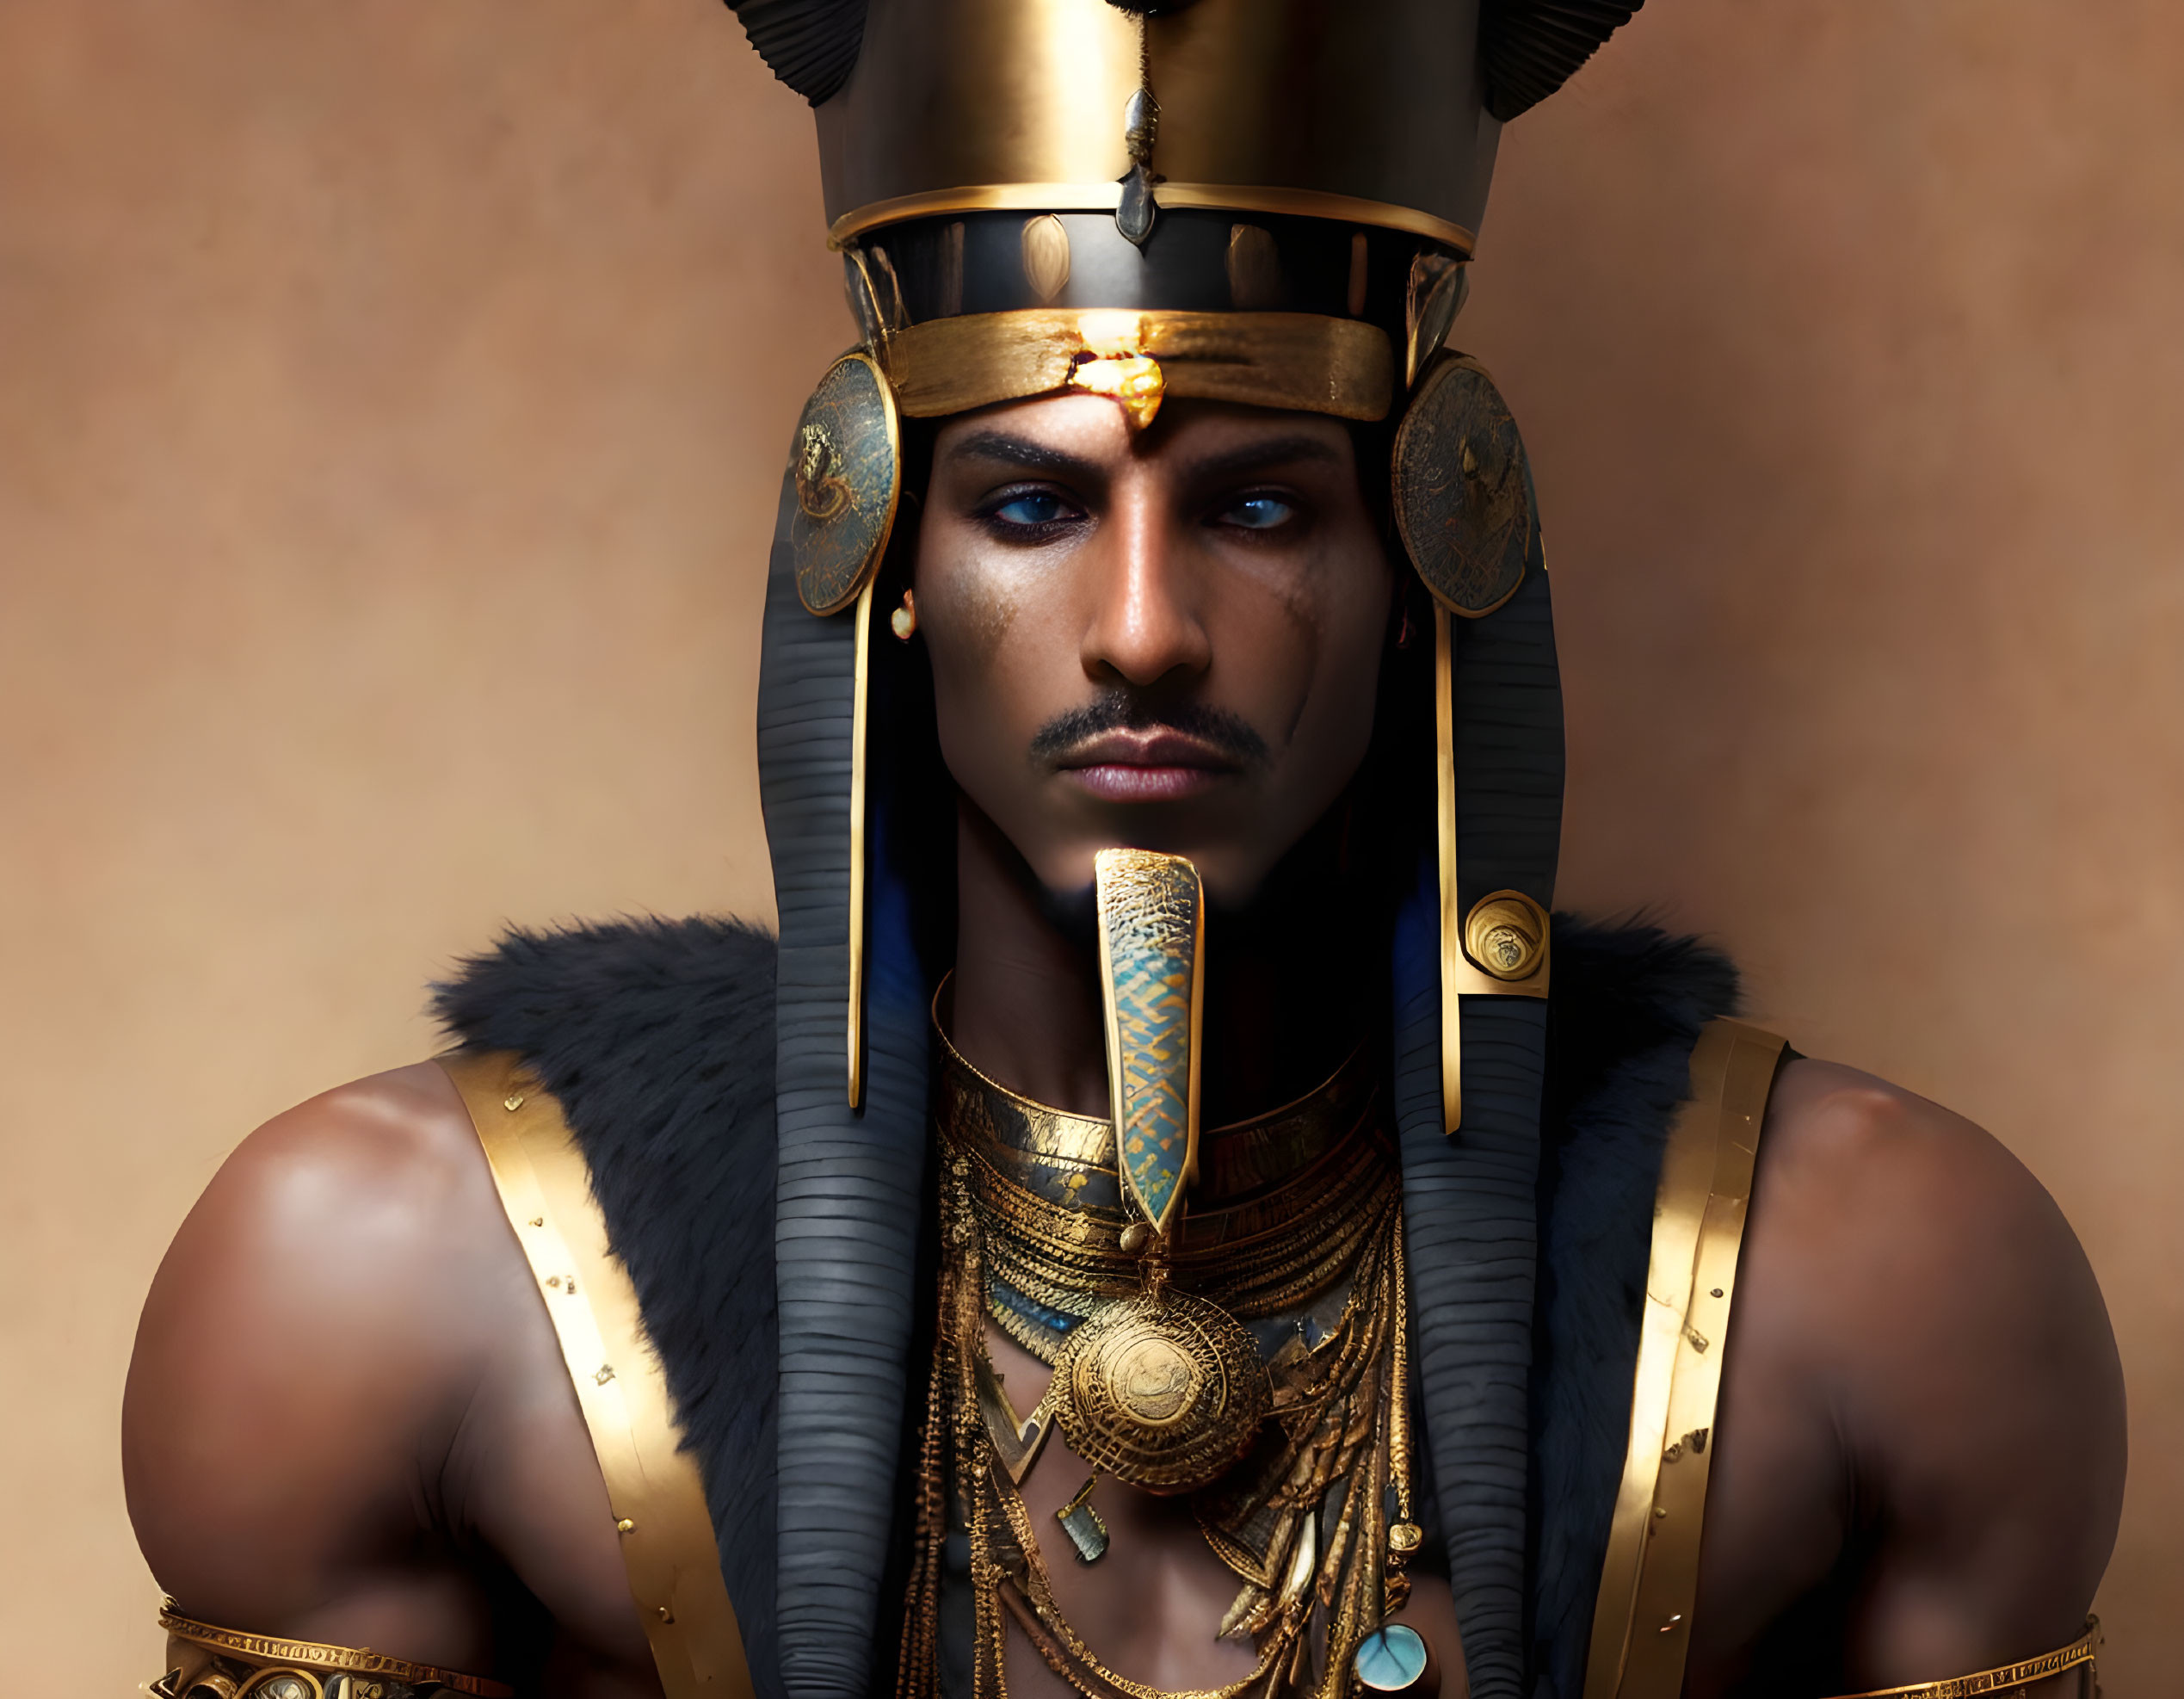 Digital portrait of person styled as ancient Egyptian pharaoh with traditional attire against warm backdrop